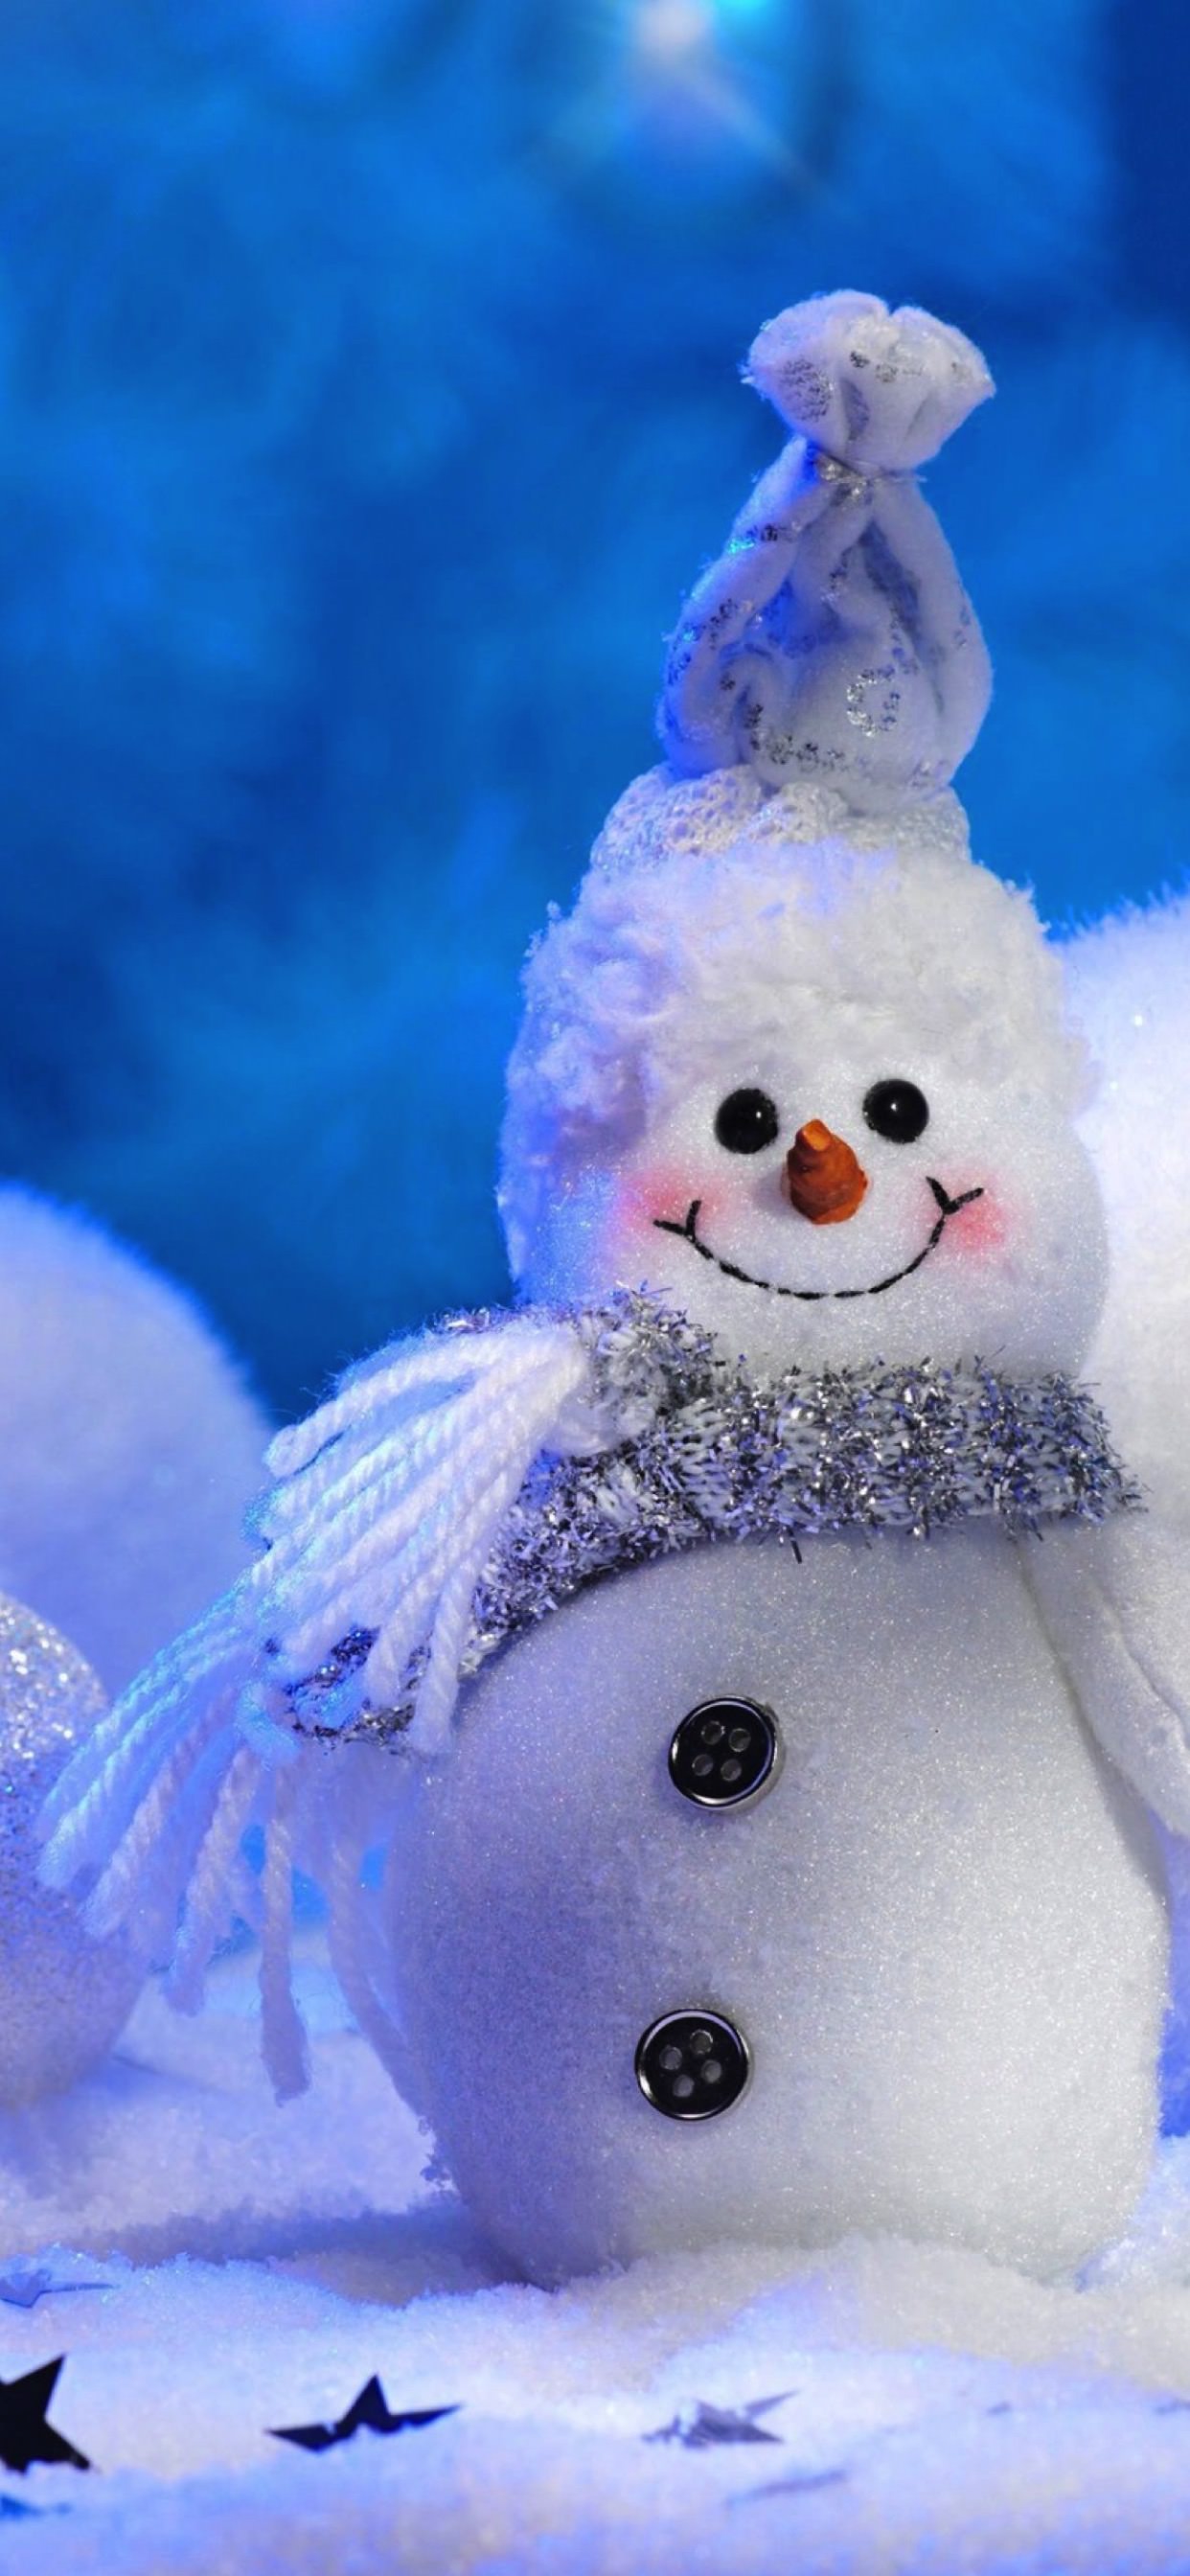 Cute Snowman Iphone Wallpapers